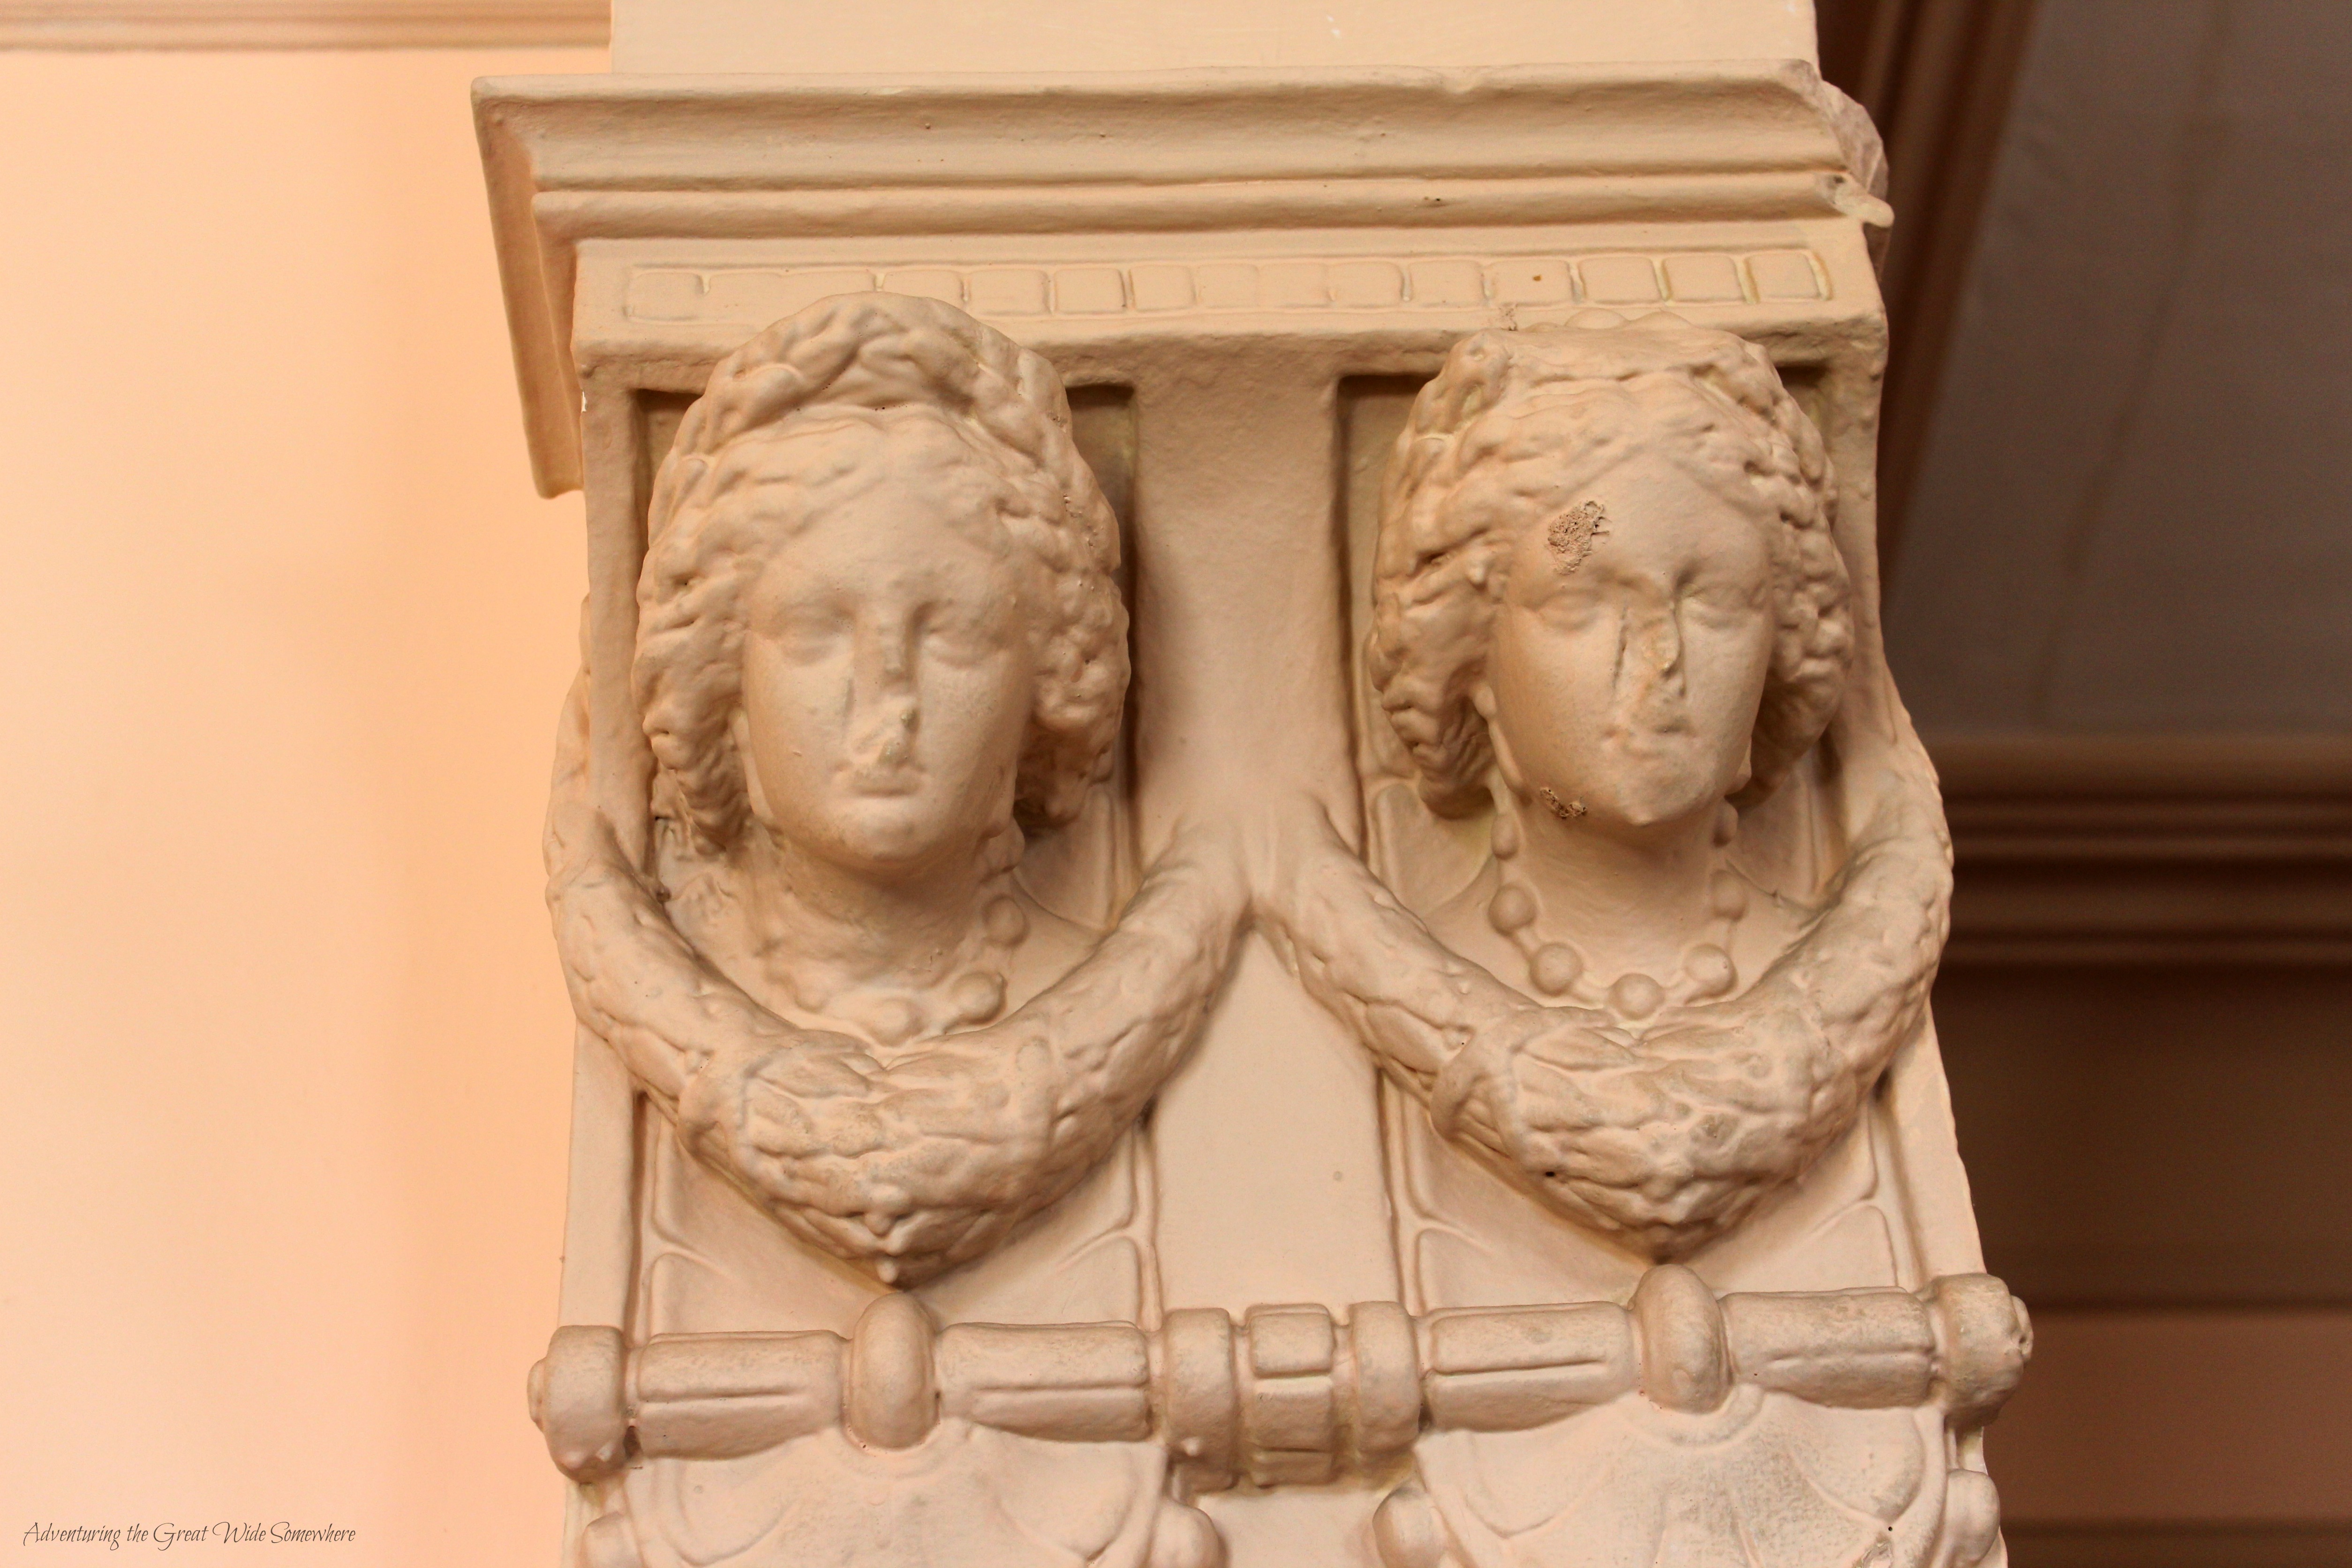 The Sculpted Faces of Angels Decorate a Column in Craigdarroch Castle